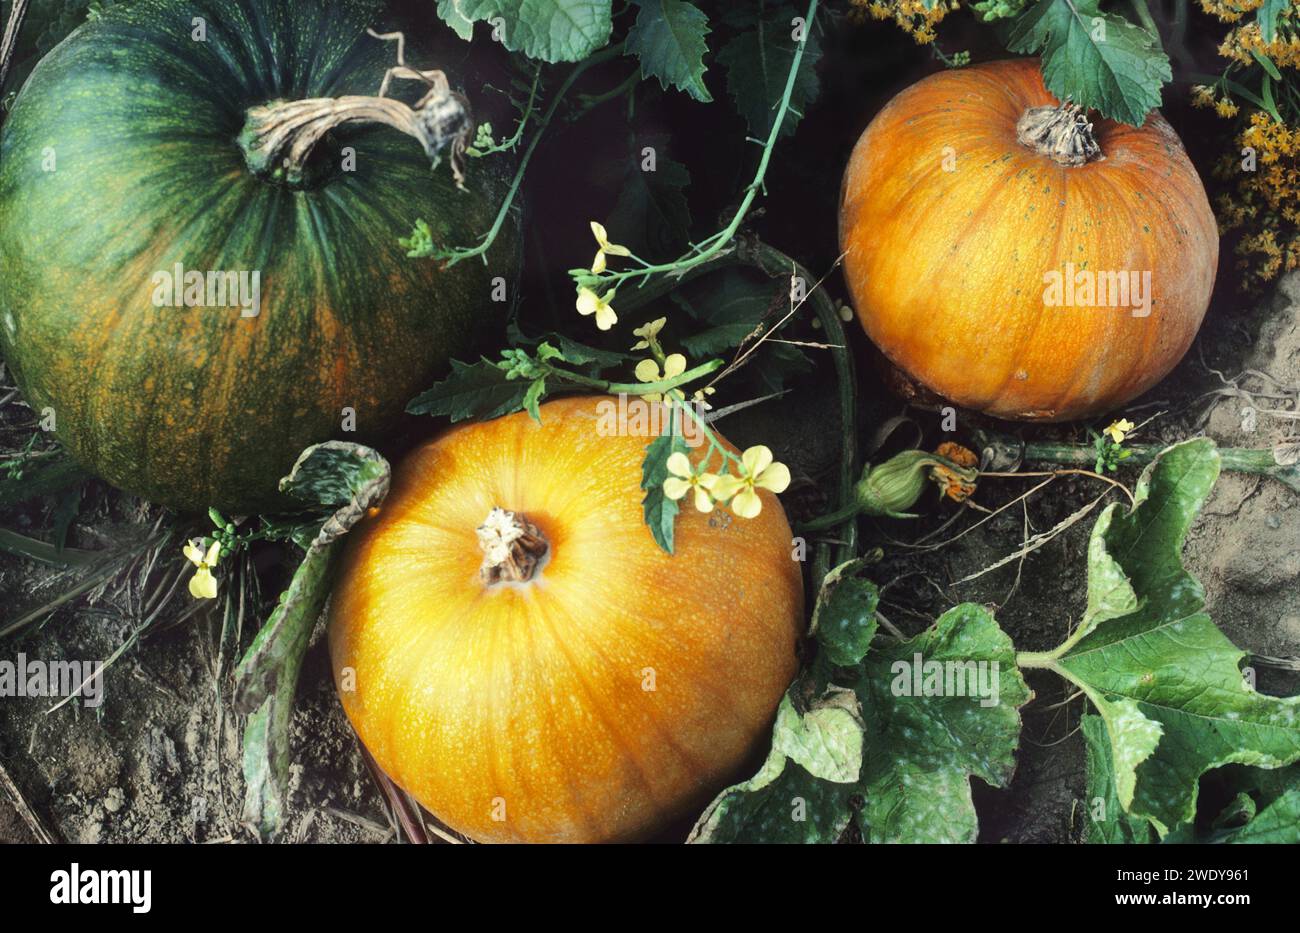 Pumpkins on the ground growing in the field. Autumn pumpkin harvest in New England USA Stock Photo